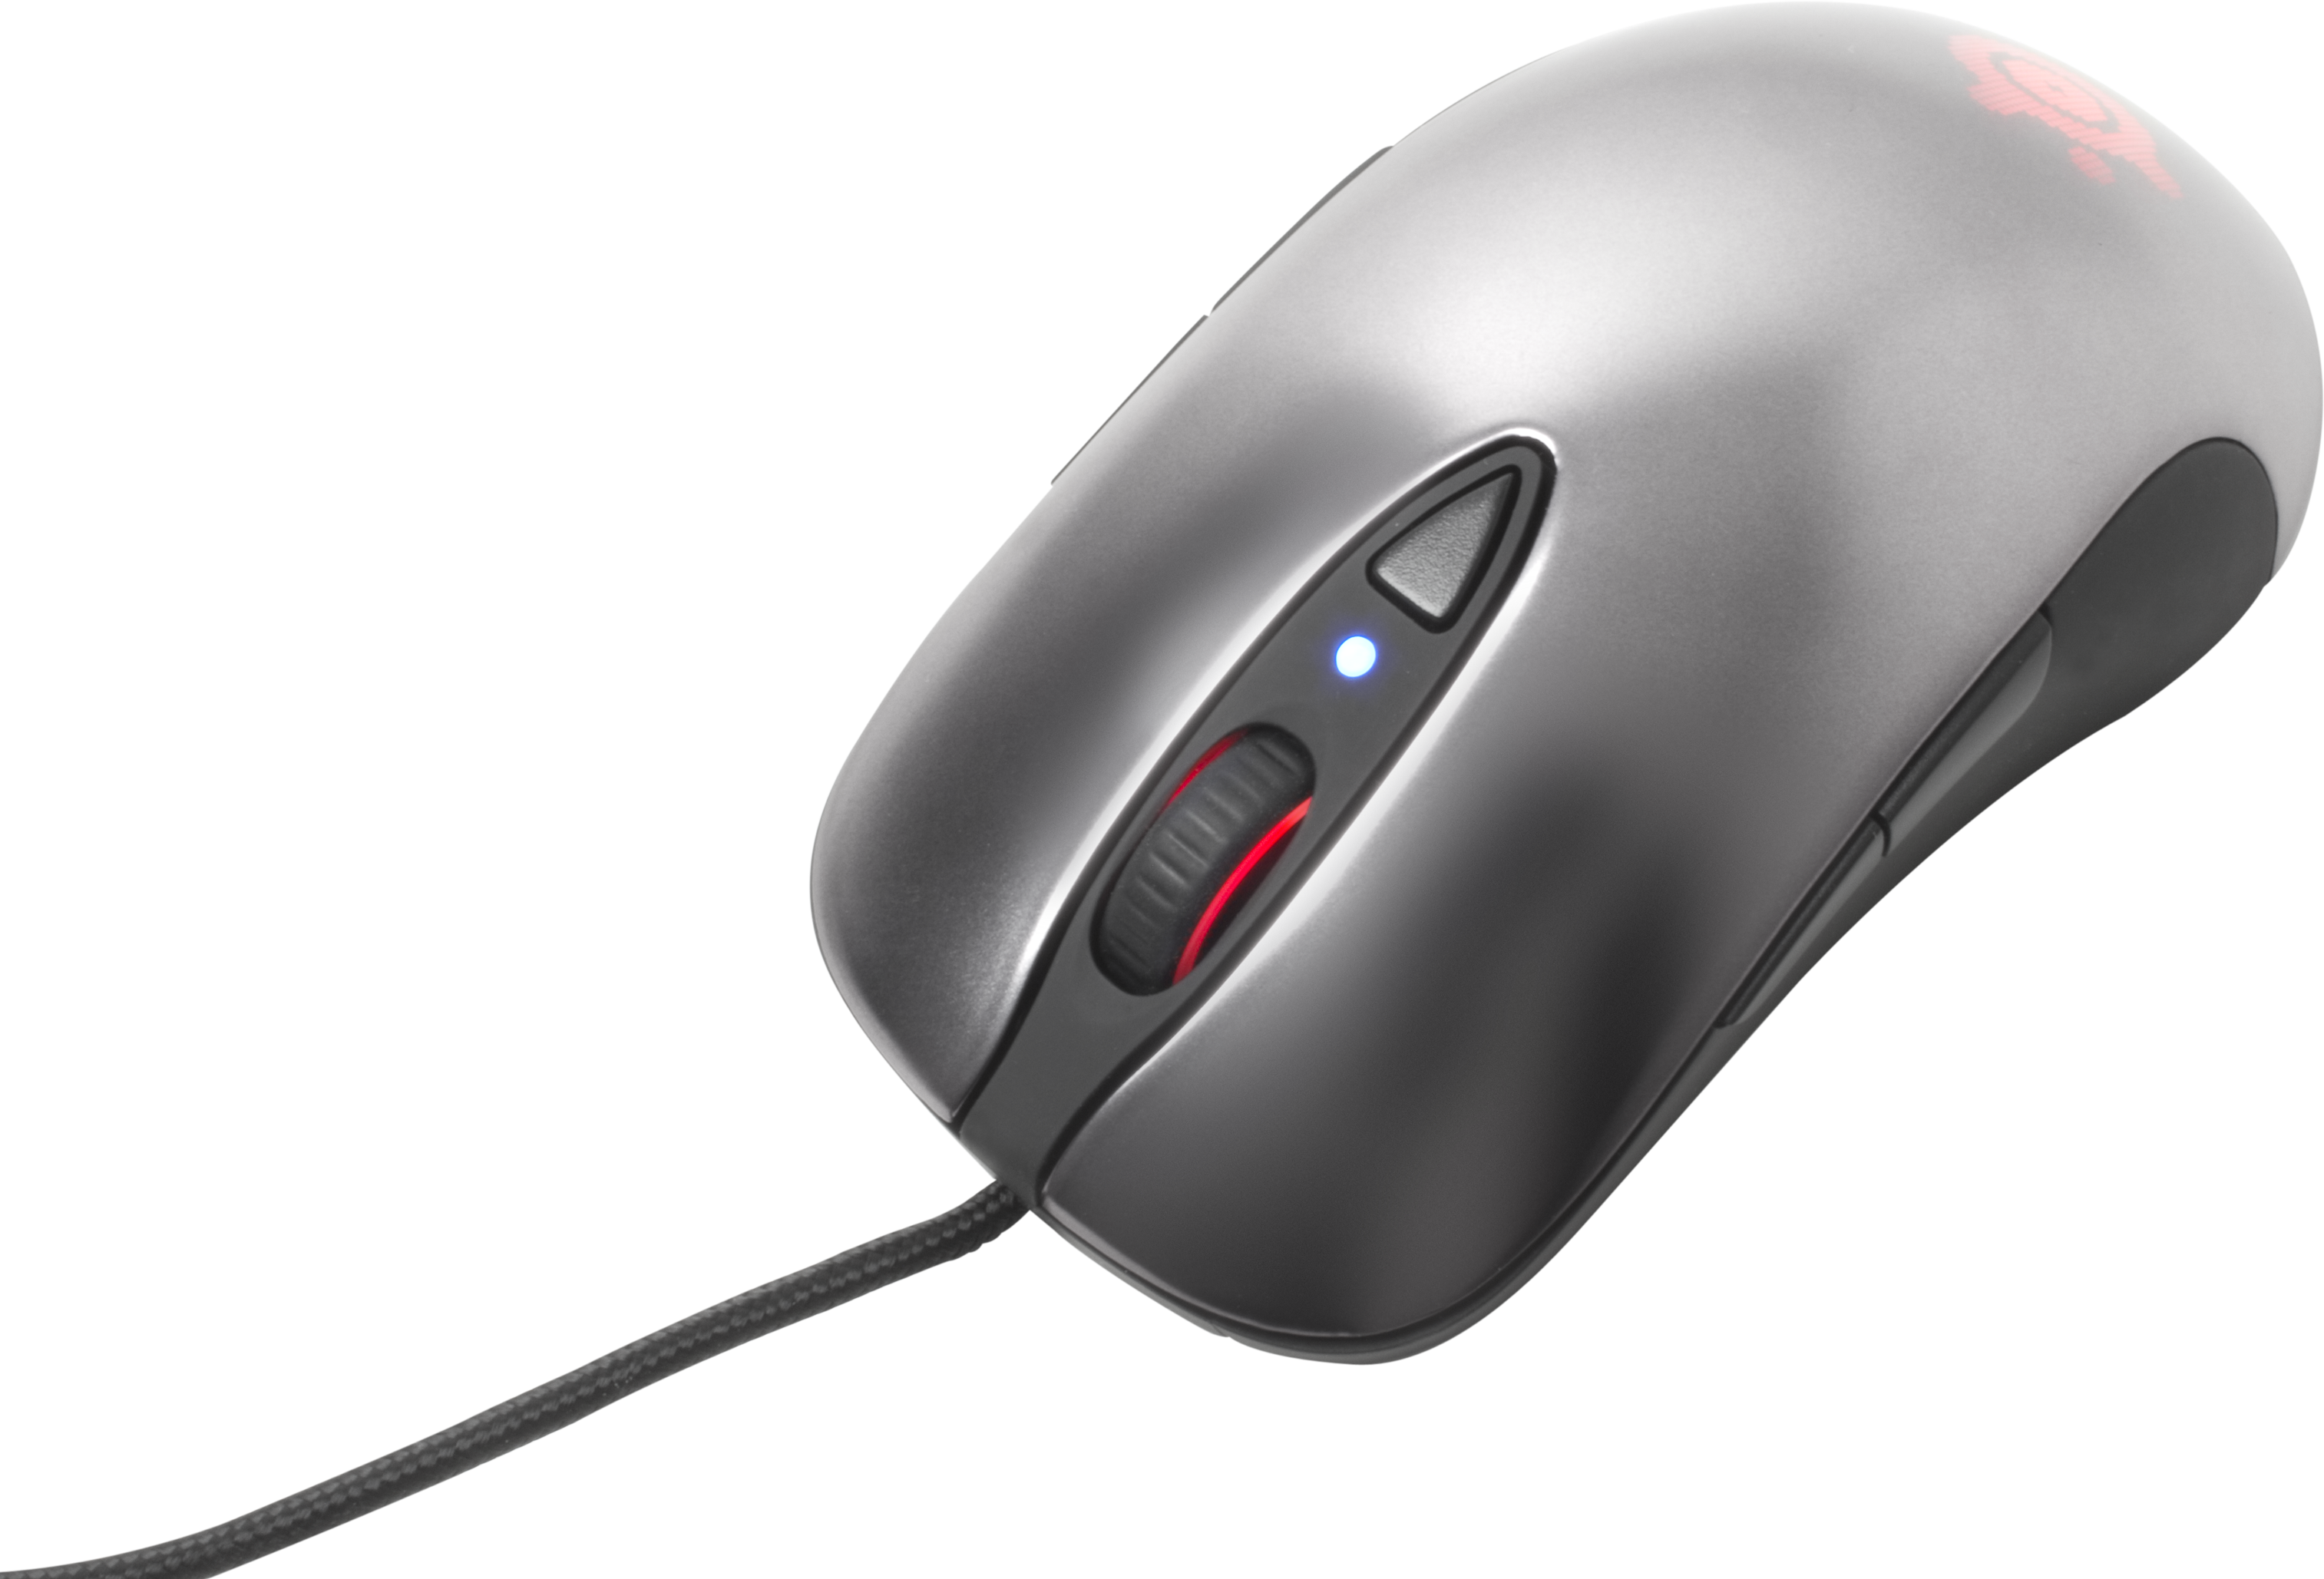 Pc Puter Mouse Png Image